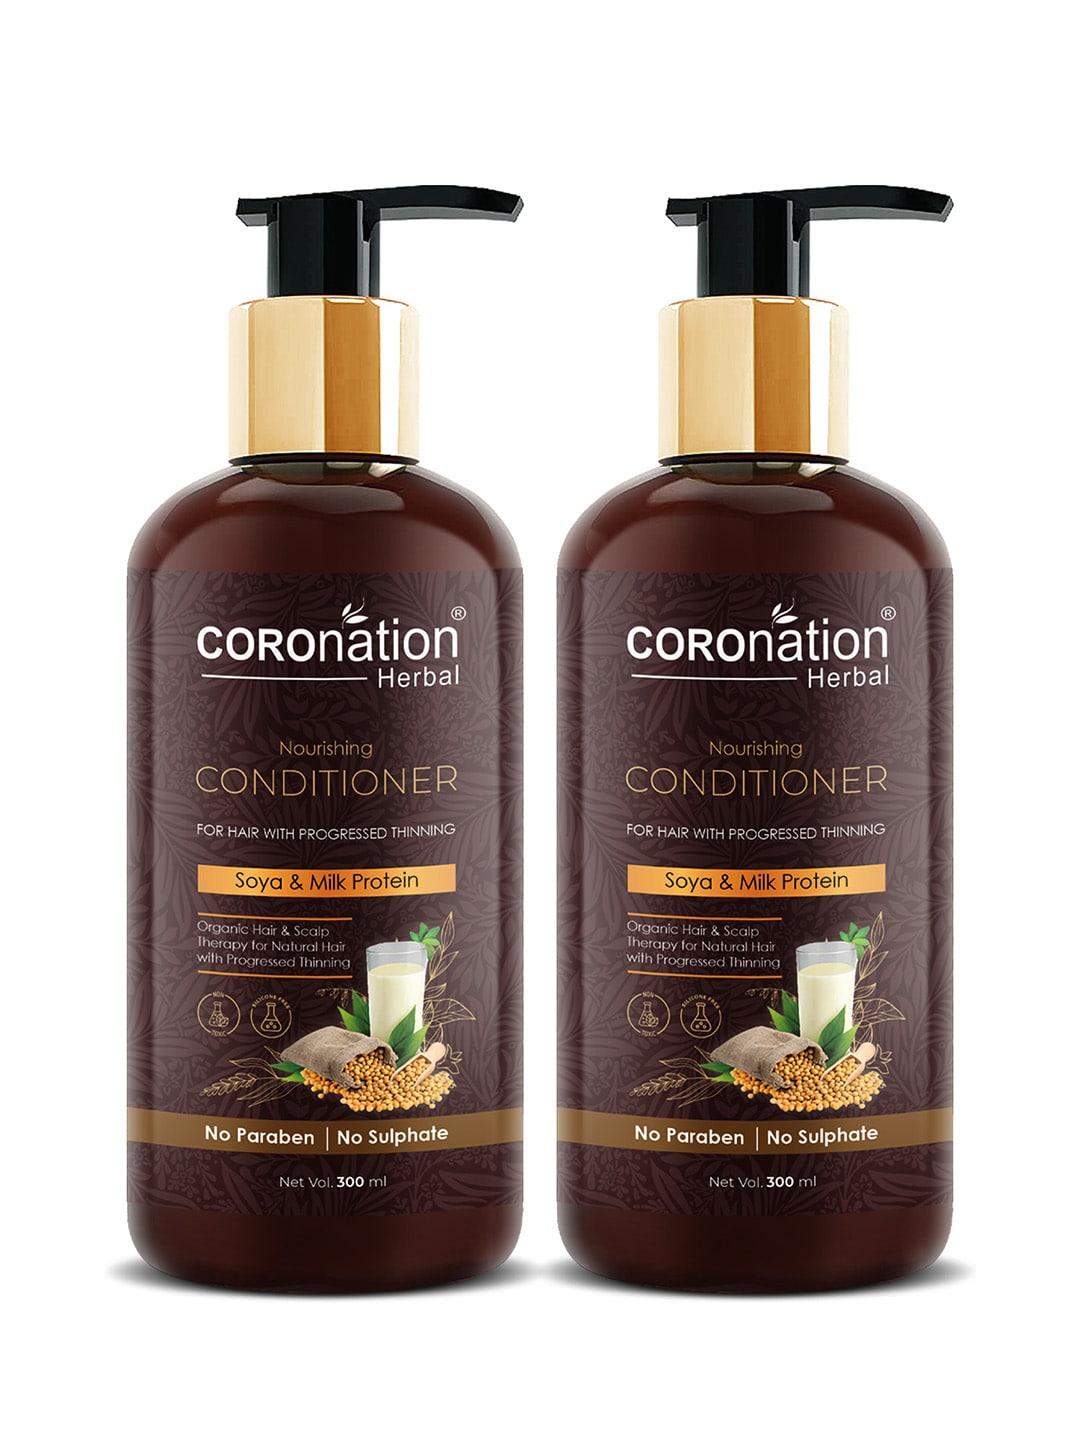 COROnation Herbal Set of 2 Nourishing Conditioner with Soya & Milk Protein 300 ml each